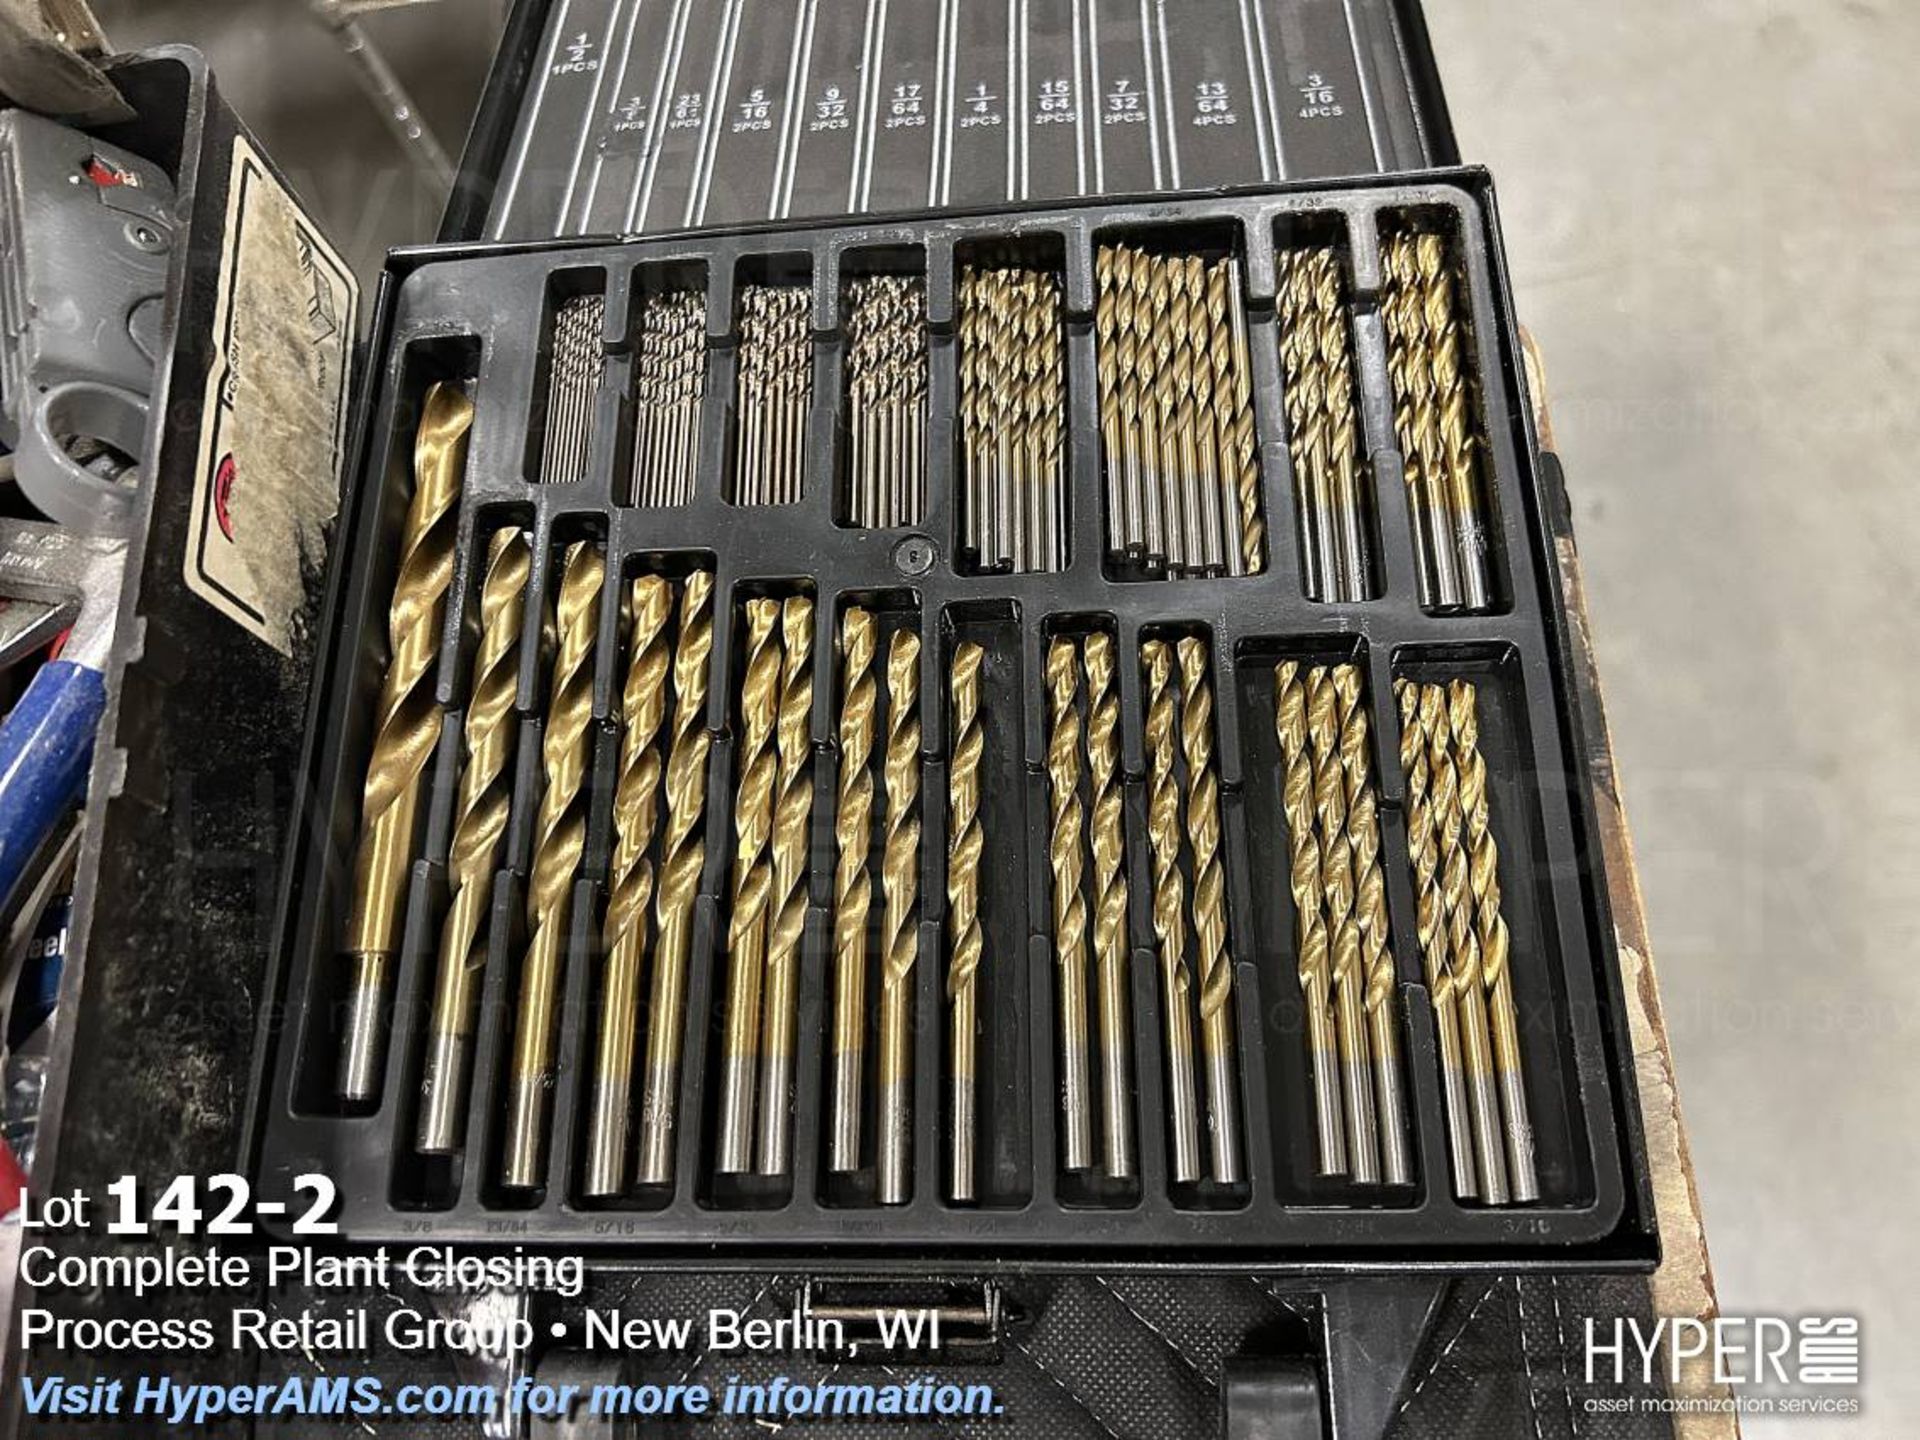 Lot: Drill bits, wire stripers, sockets - Image 2 of 3